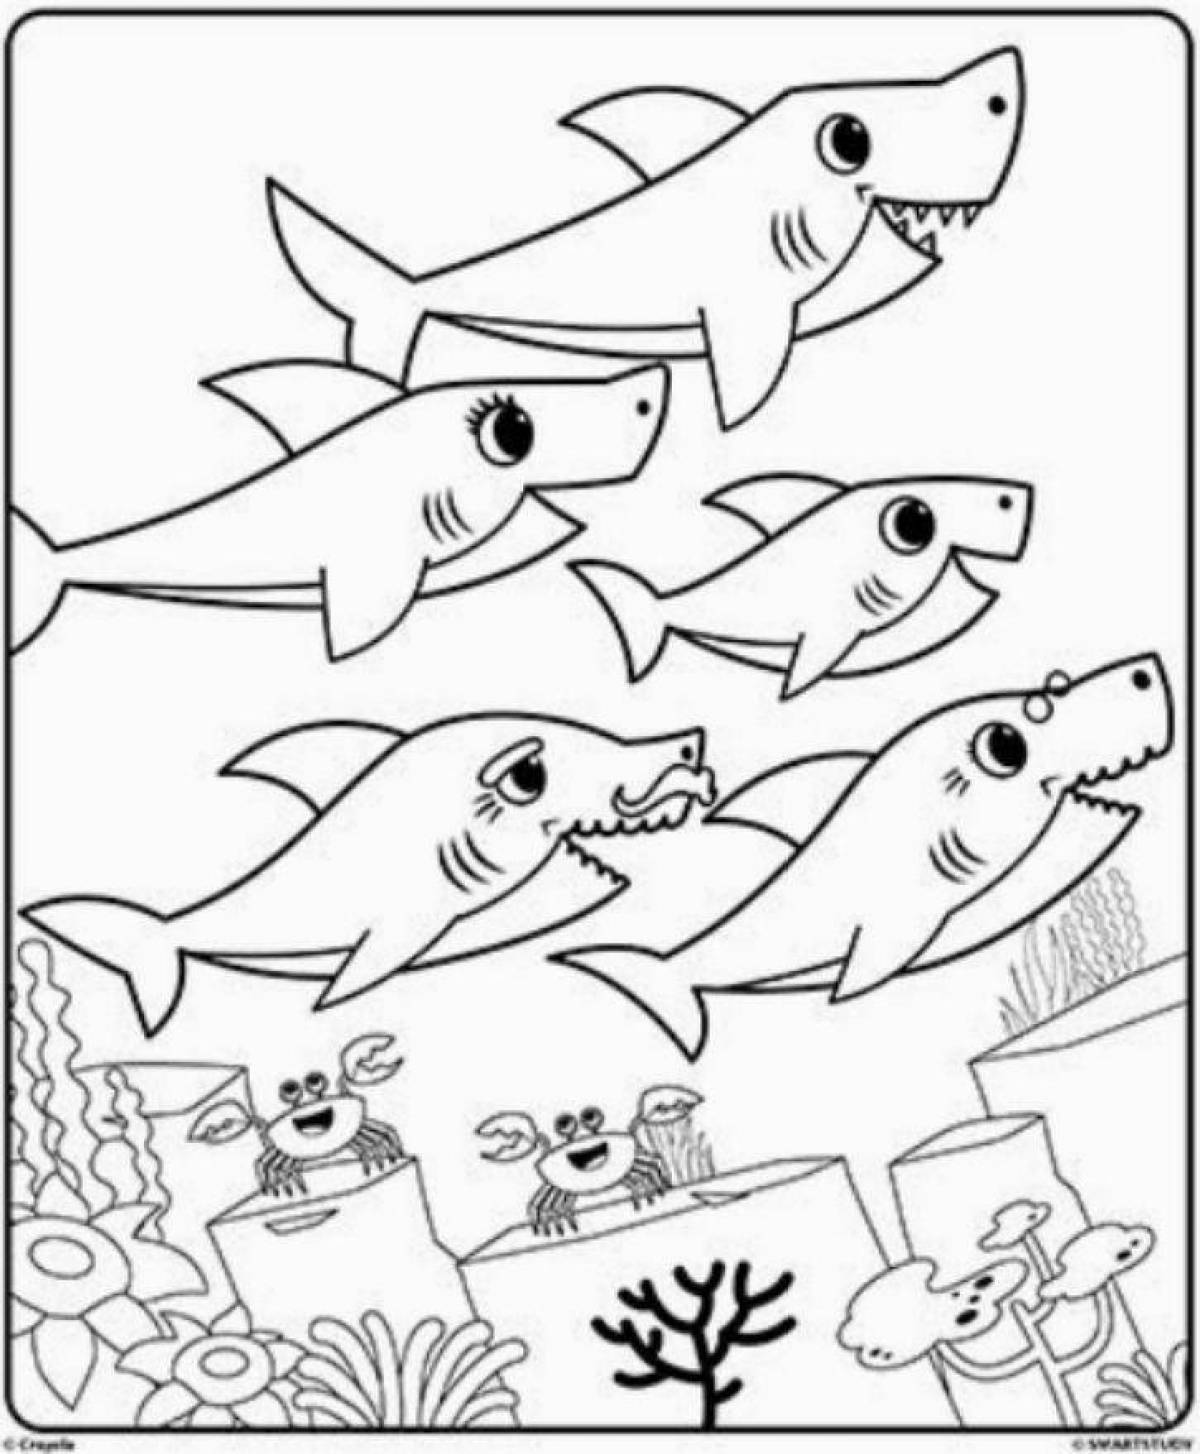 Exquisite shark coloring book for kids